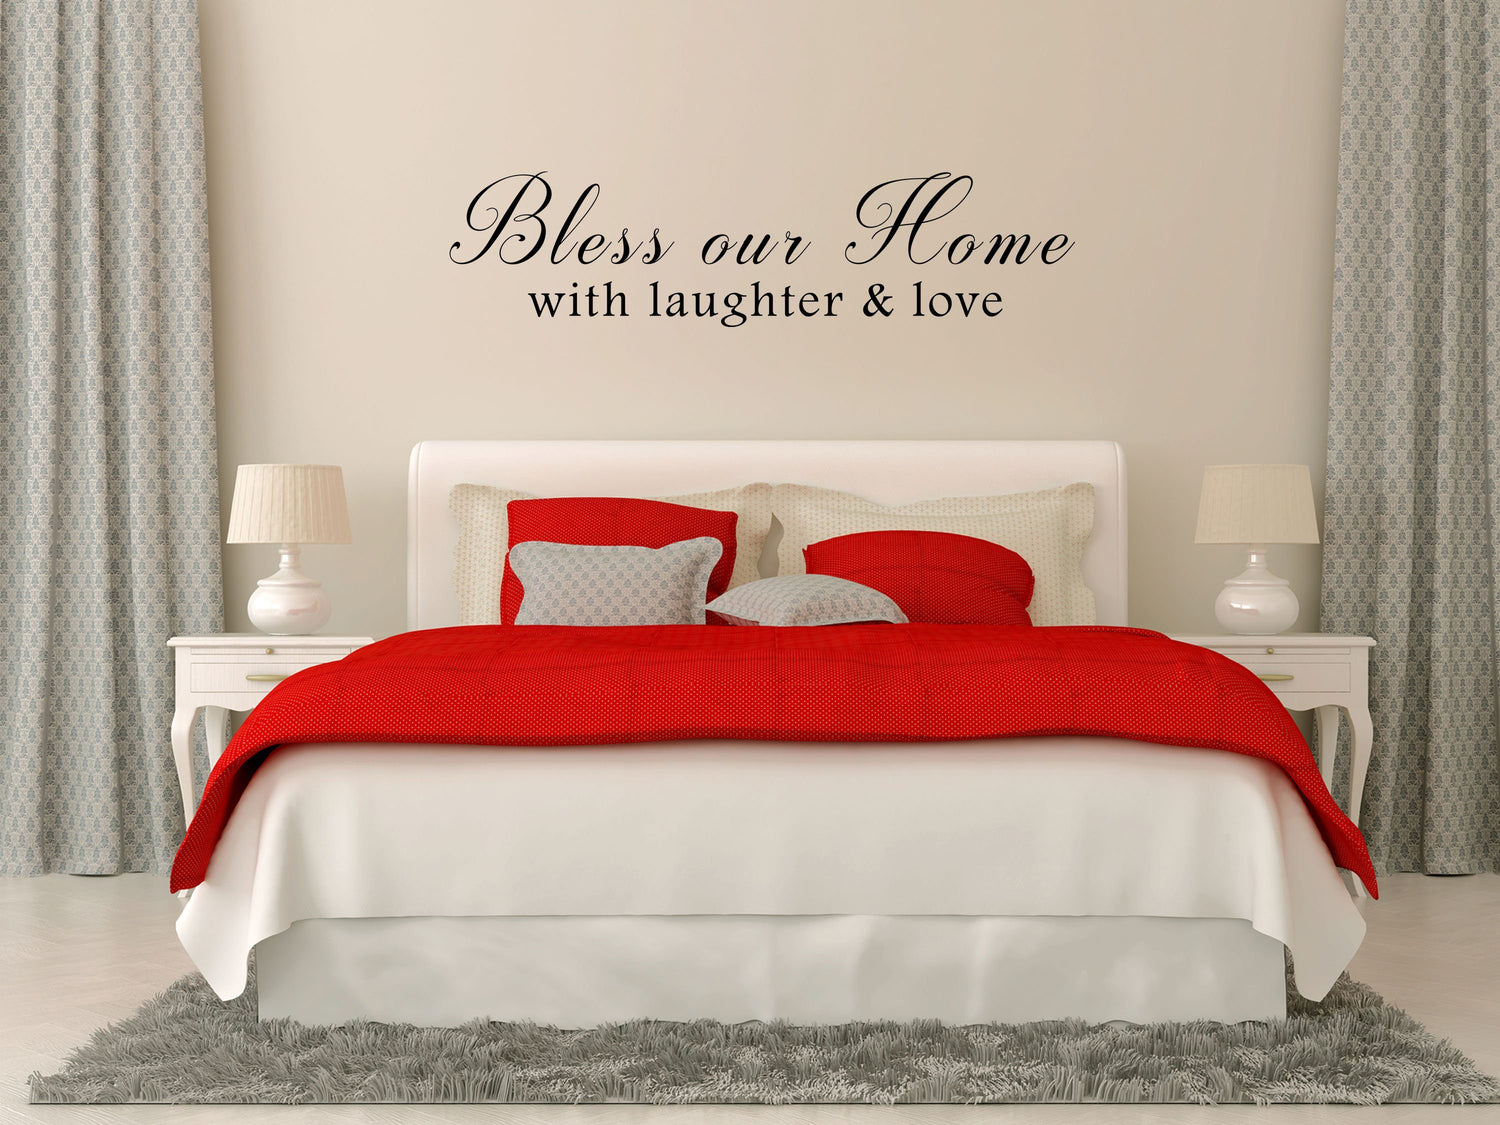 Bless Our Home With Laughter & Love Sticker - Inspirational Wall Decals Vinyl Wall Decal Inspirational Wall Signs 